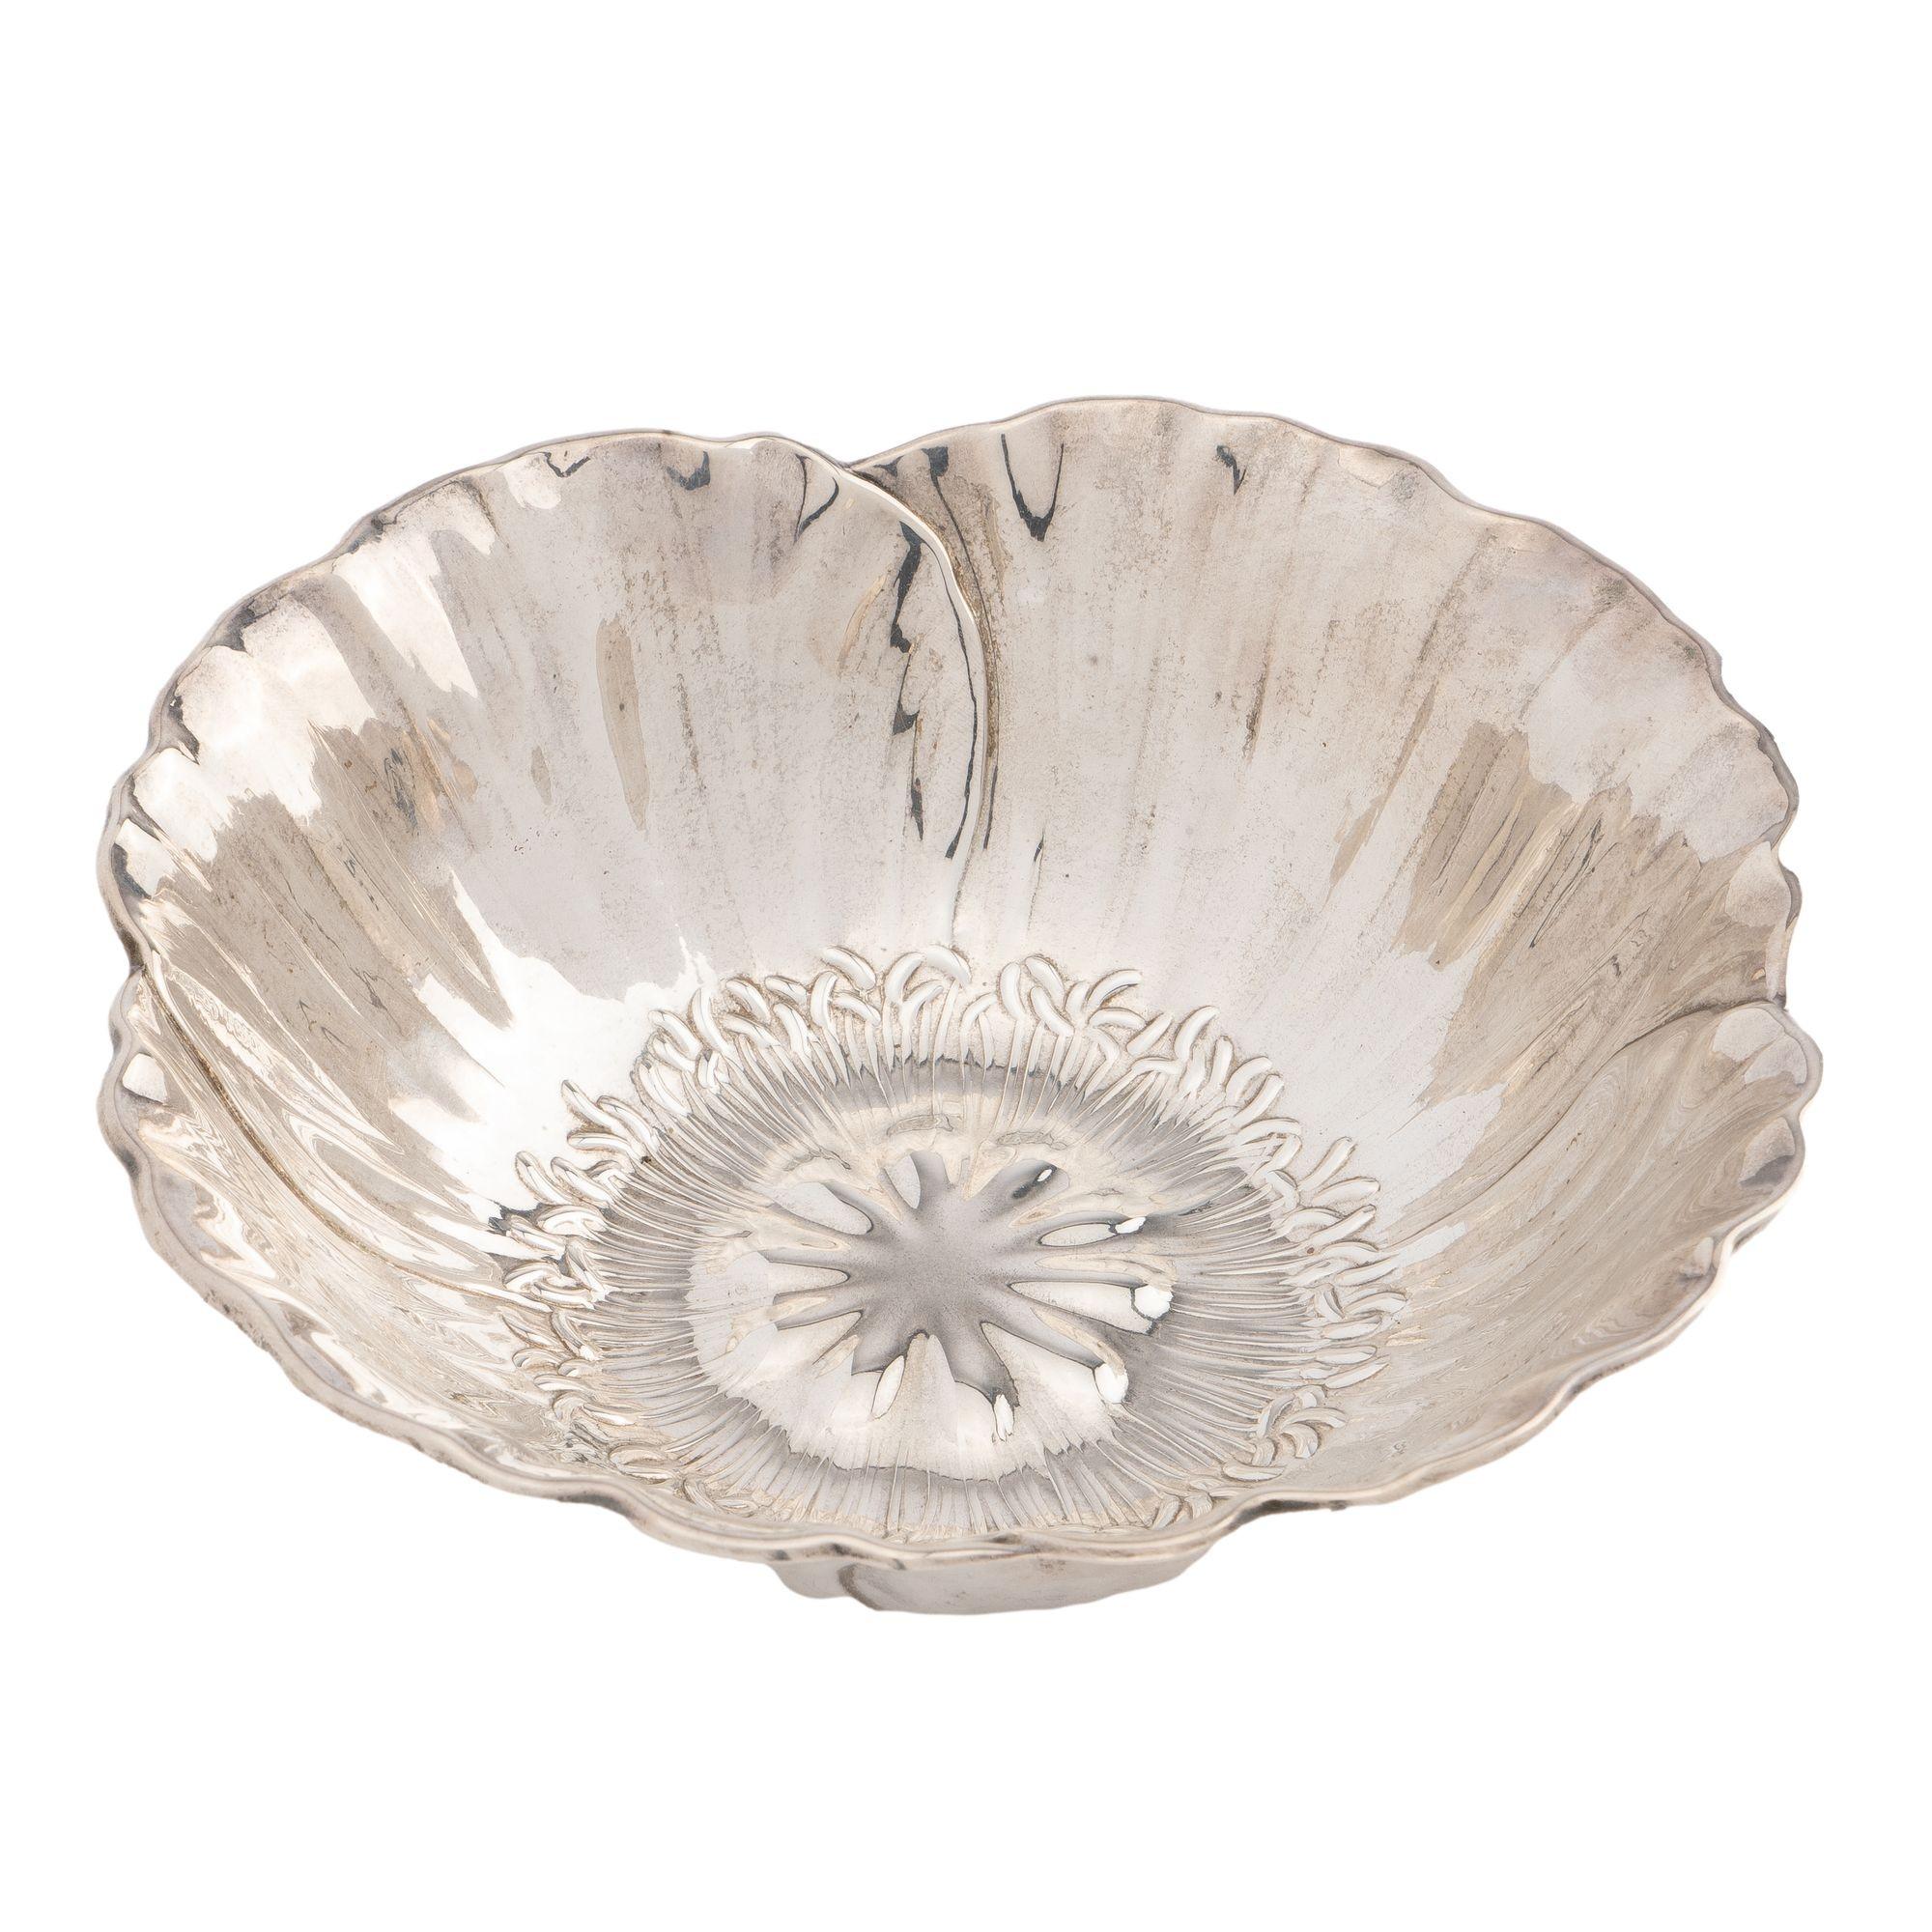 Hand hammered sterling silver poppy motif bowl in the Aesthetic taste by the Meriden Britannia Co.
Meriden, Connecticut, after 1893.